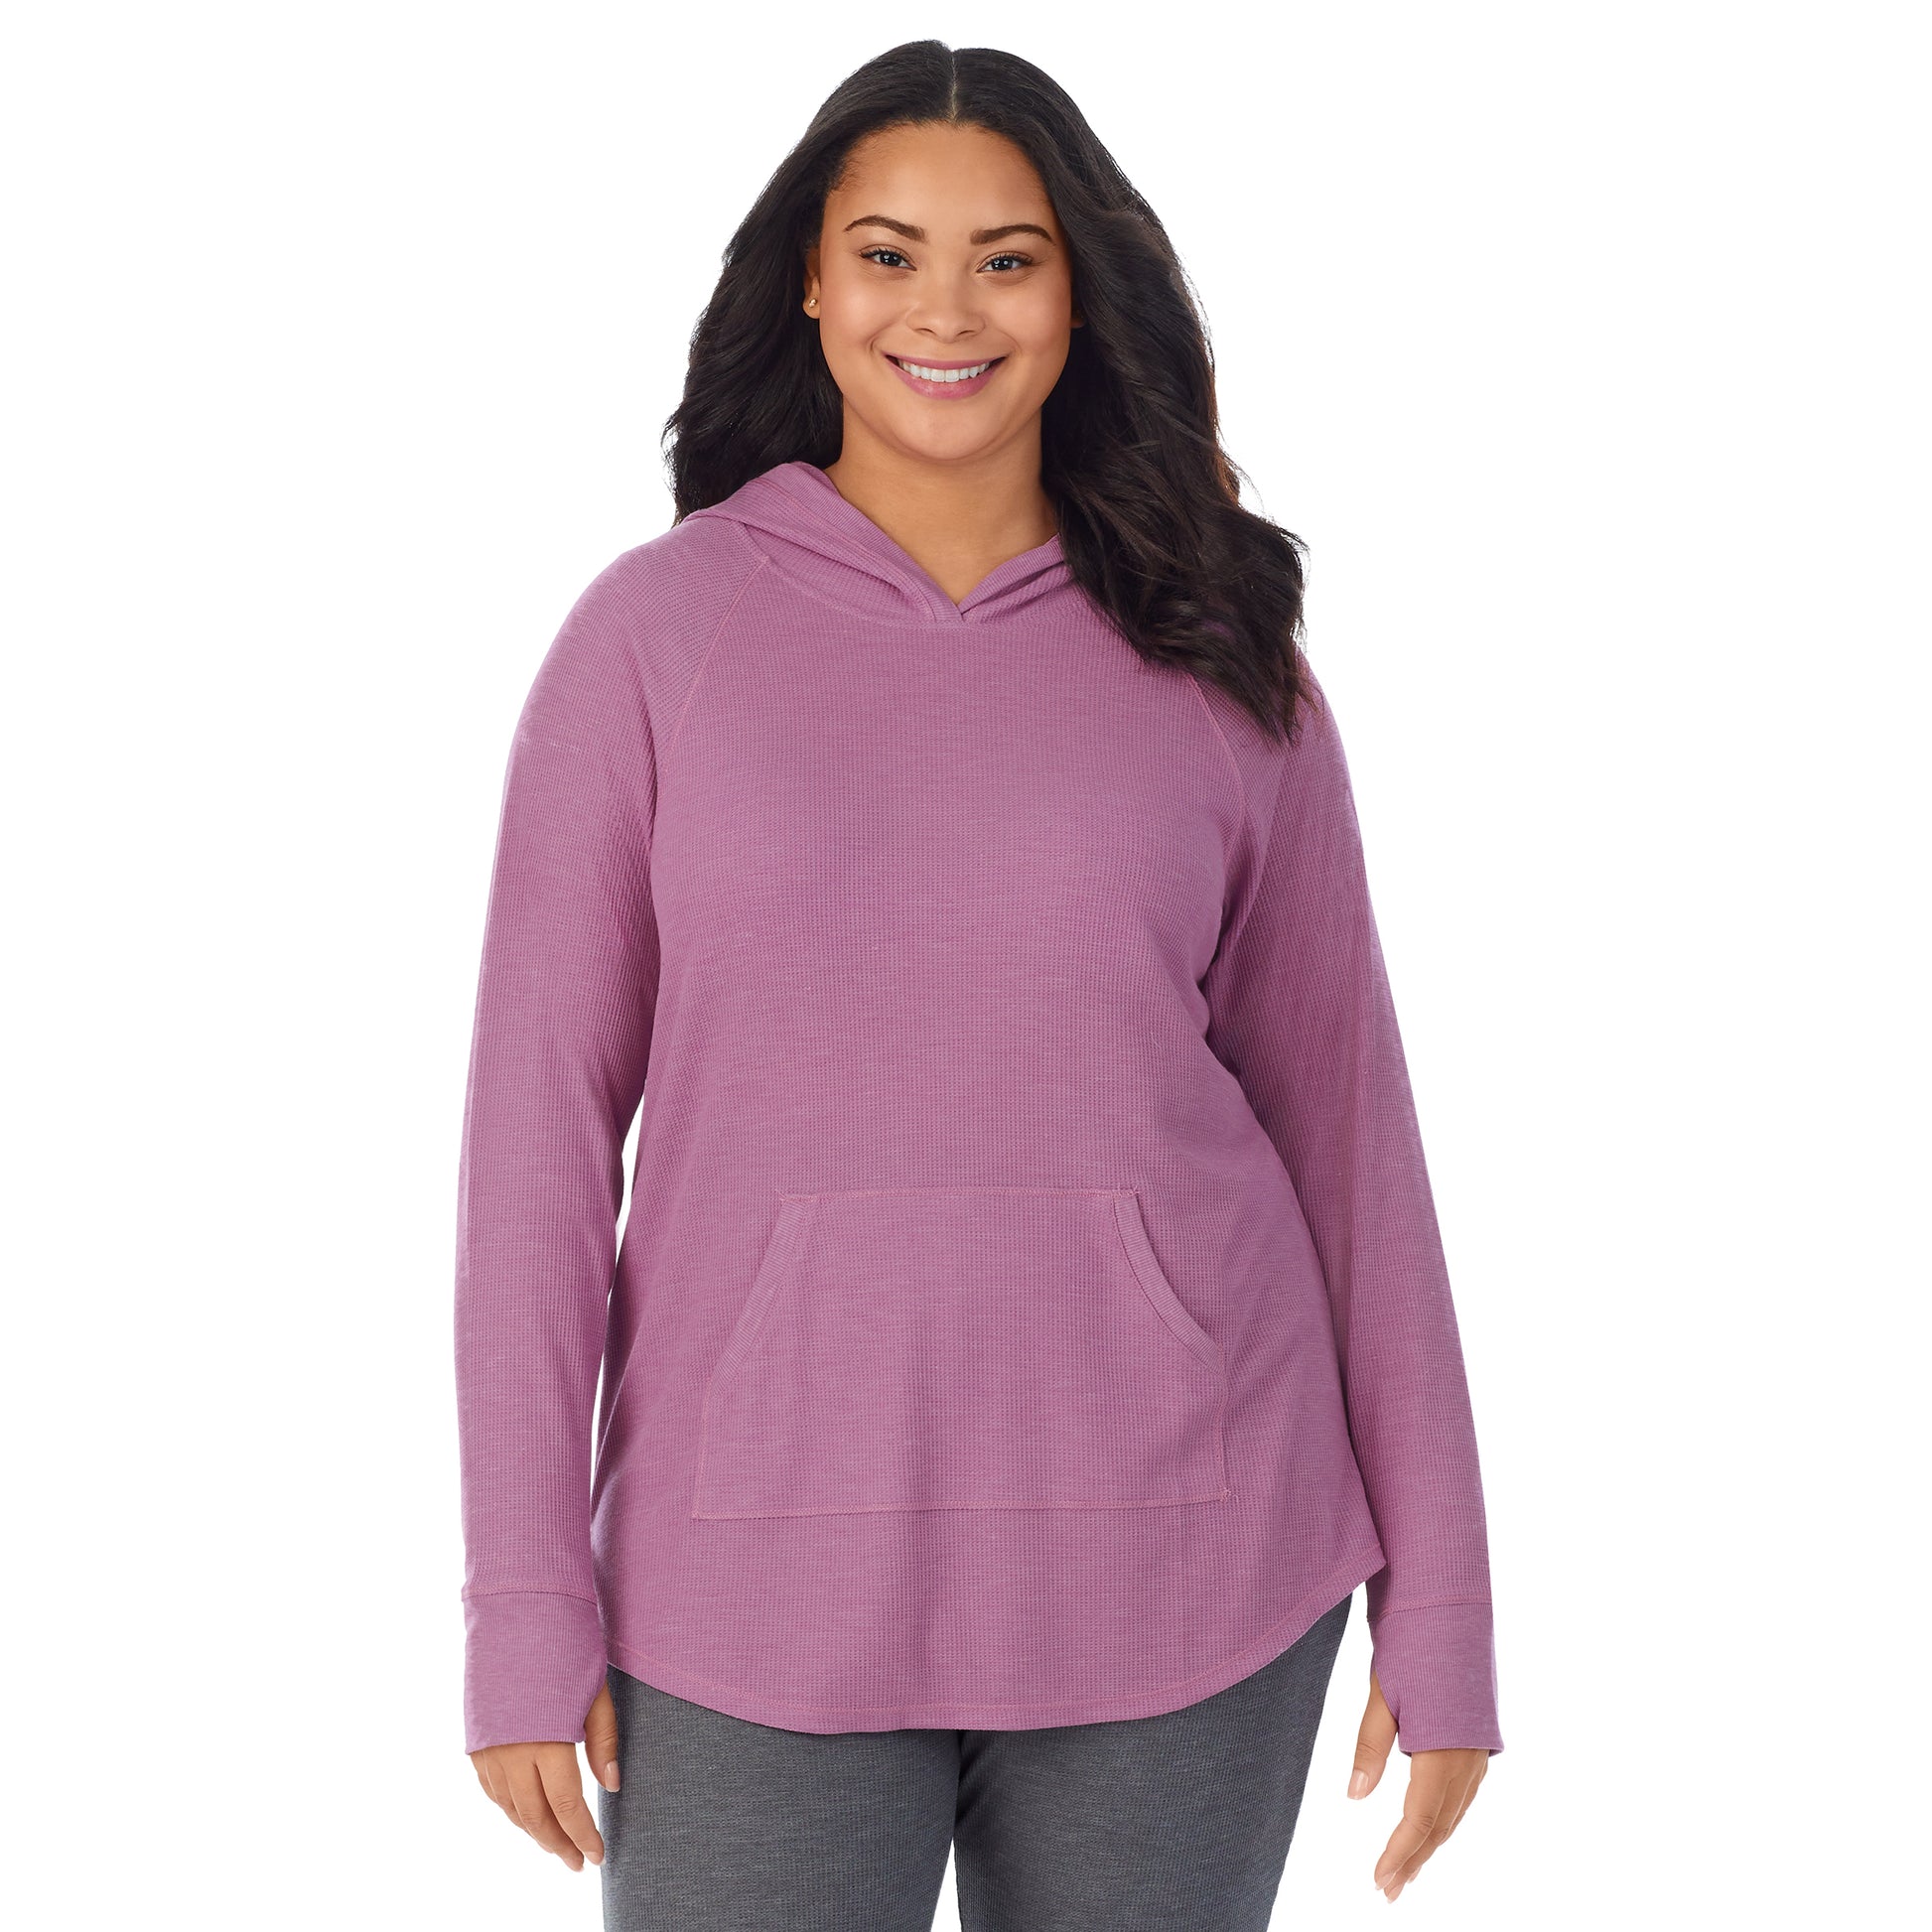 Mulberry Mist Heather; Model is wearing size 1X. She is 5’11”, Bust 36”, Waist 36.5”, Hips 47.5”. @A lady wearing a Mulberry Mist Heather long sleeve hoodie tunic plus.